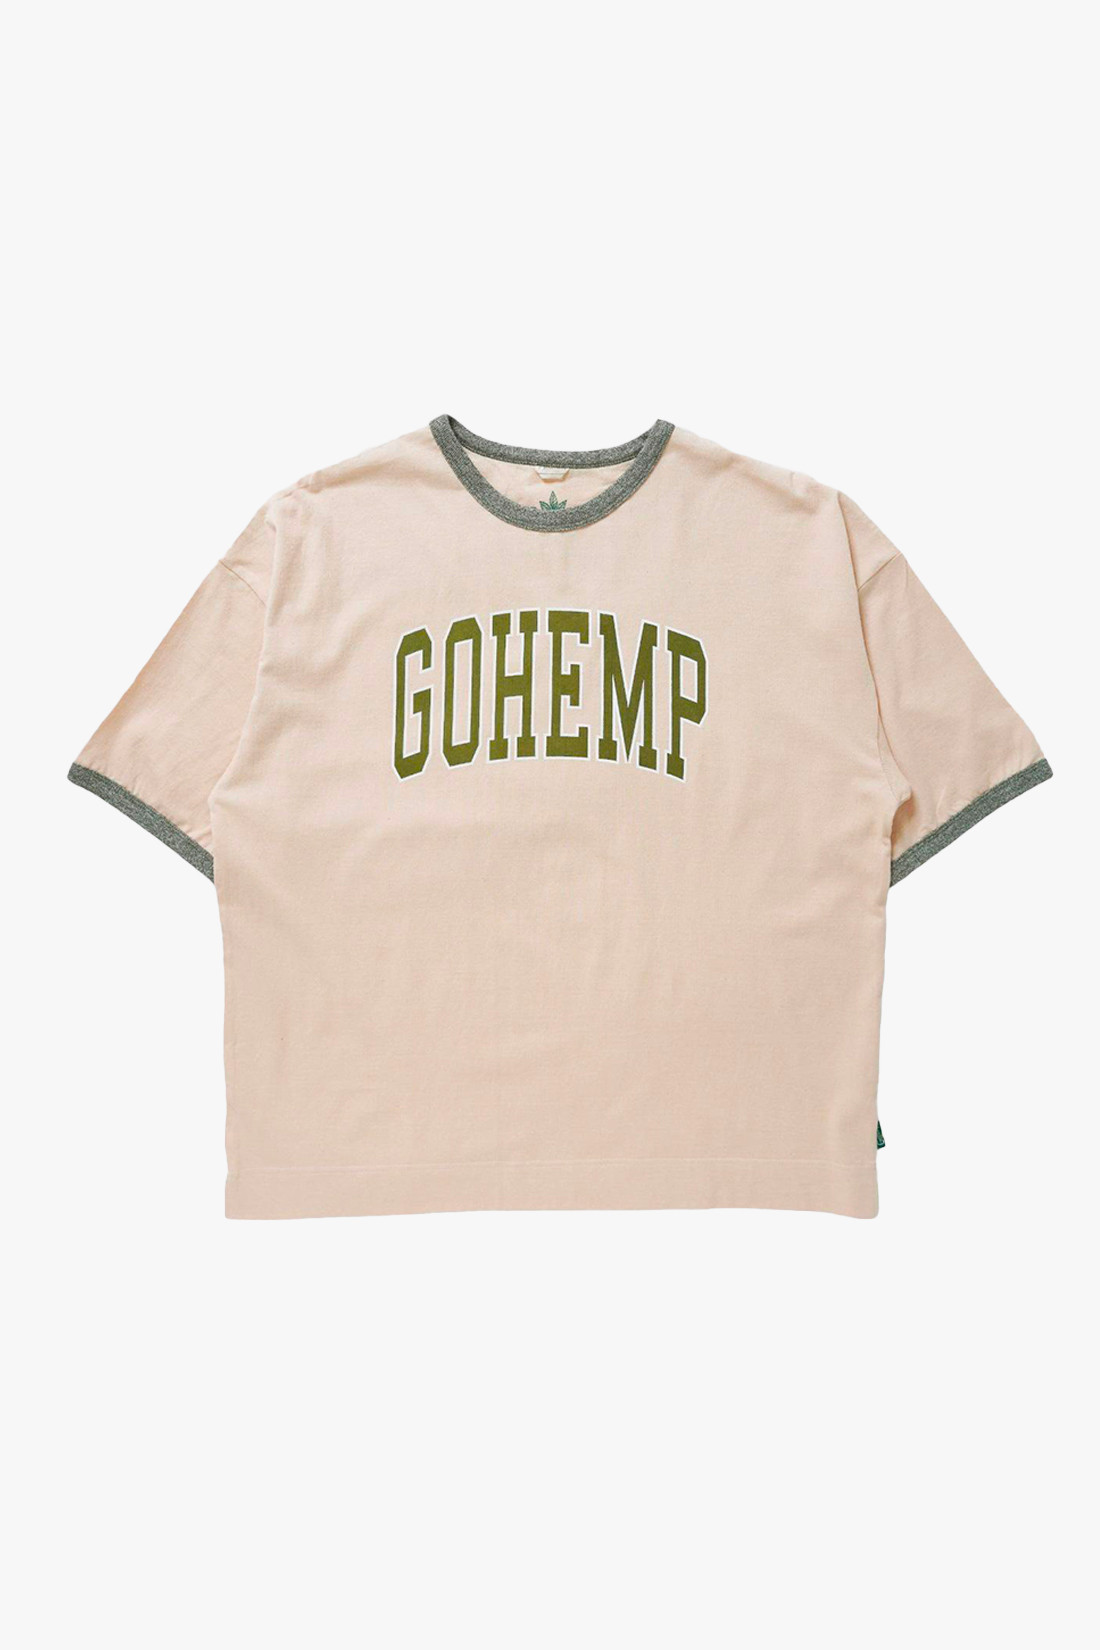 College logo wide ringer tee Green